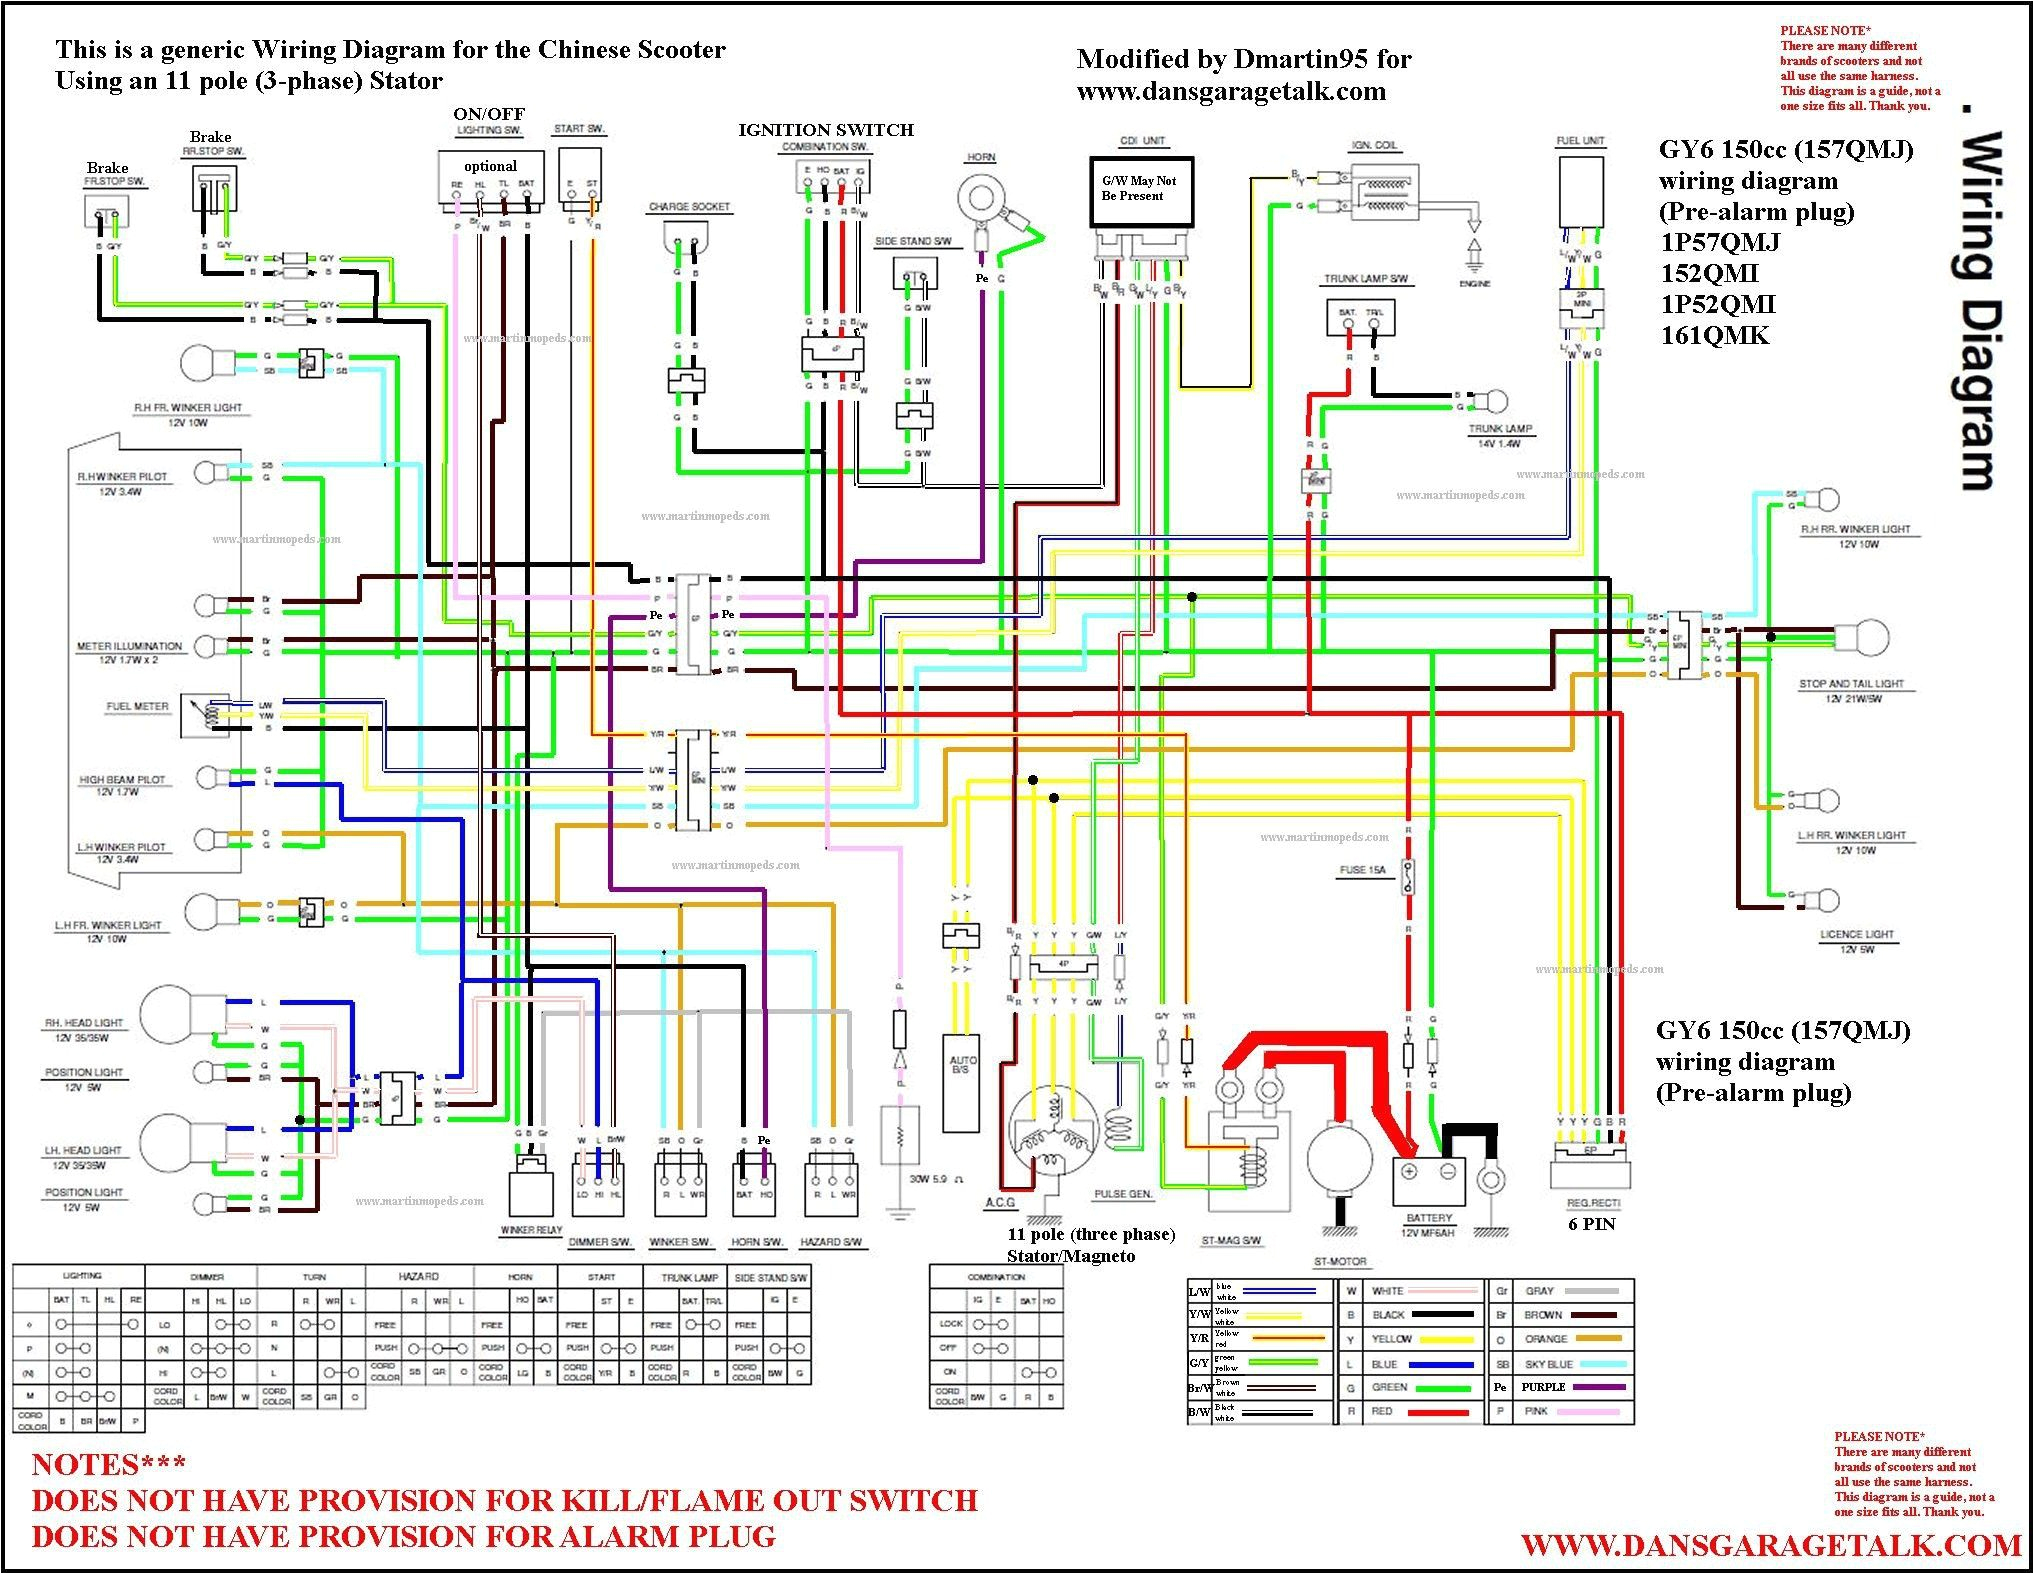 50cc scooters wiring diagram cool wiring diagrams chinese scooter club view topic cdi wiring help pic included